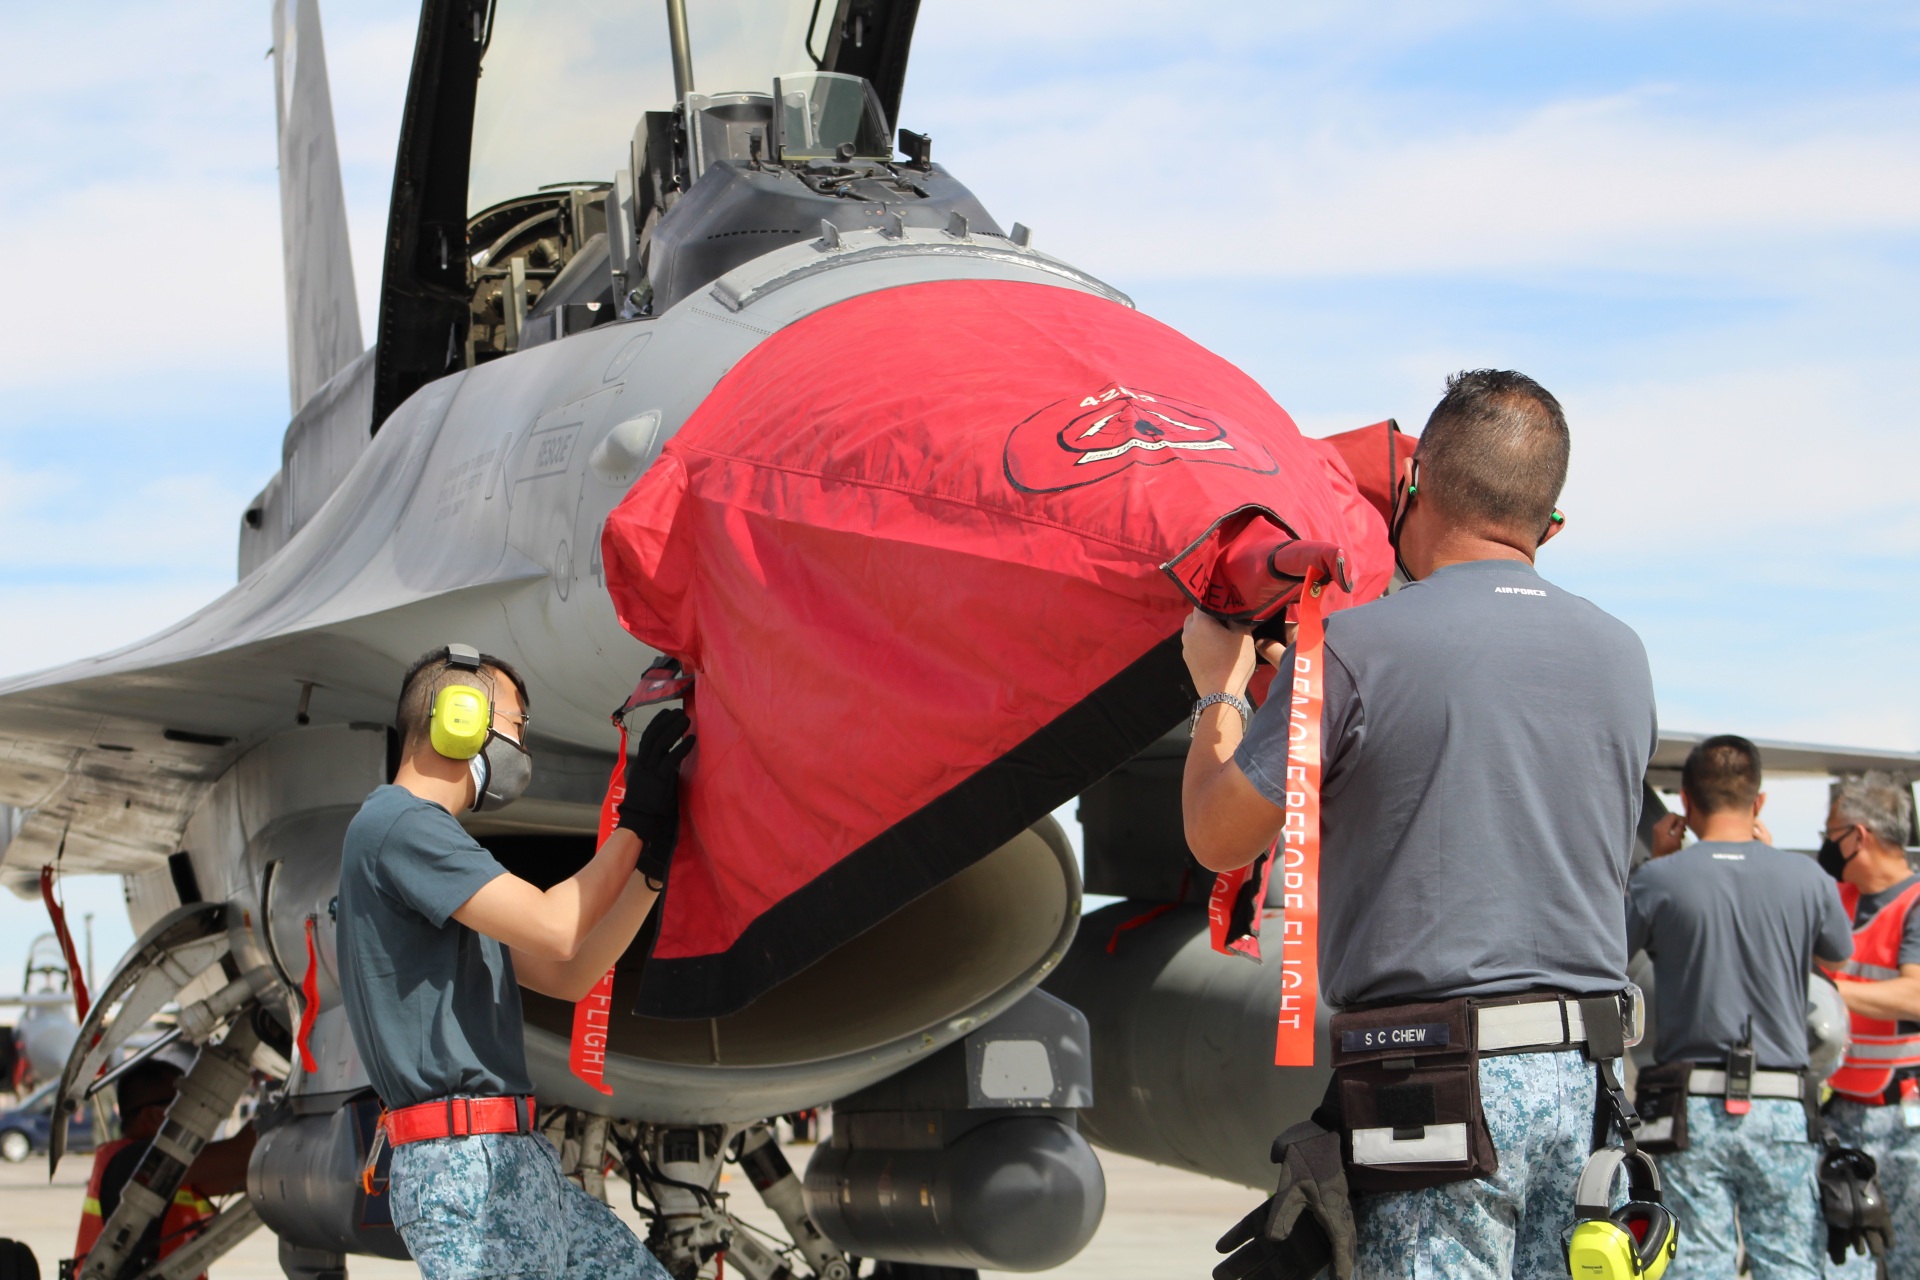 The RSAF's ground crew from PC II detachment conducting checks on the RSAF's F-16C/Ds at the flight line of Nellis Air Force Base prior to the start of XRFN 22.